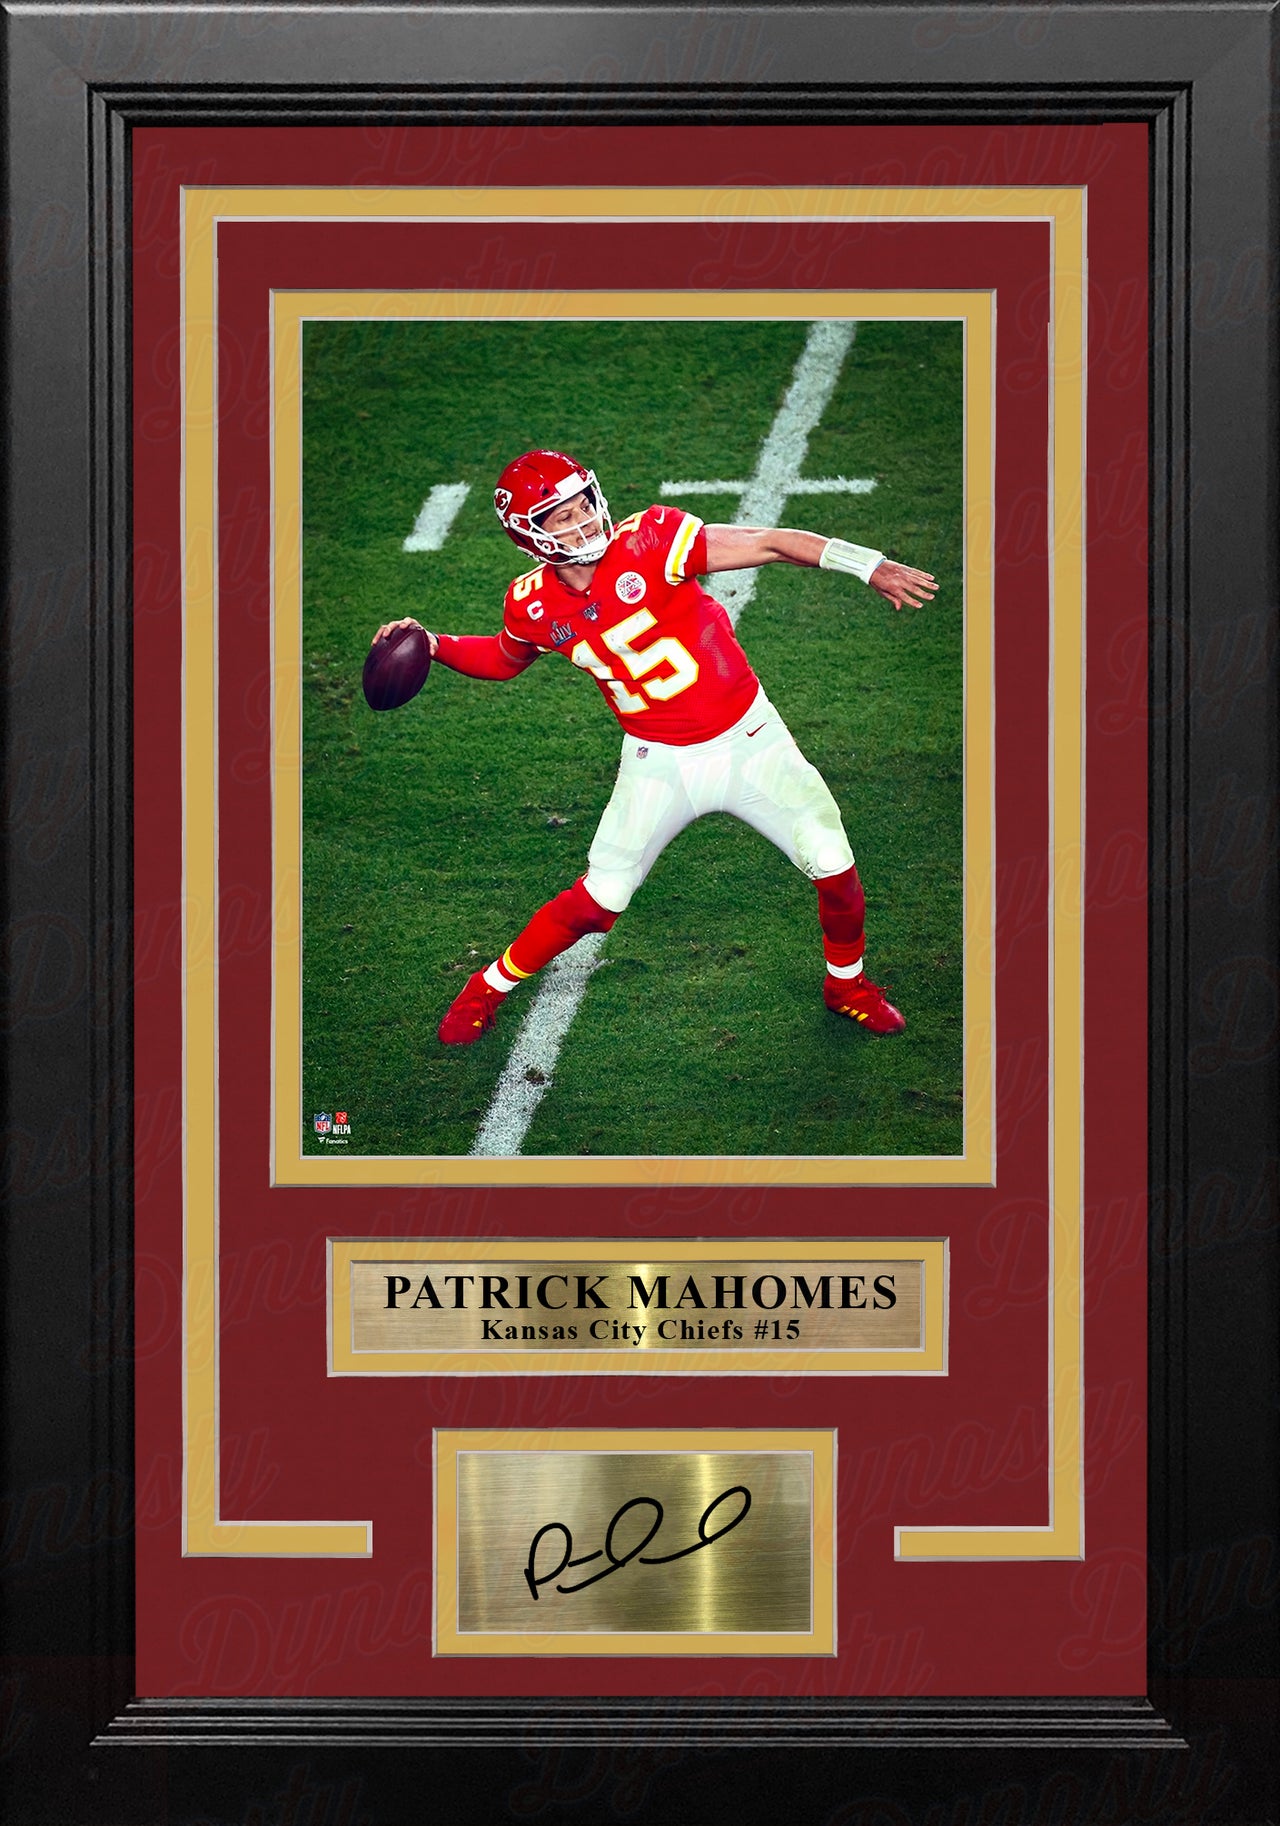 Patrick Mahomes Throwing Action Kansas City Chiefs 8" x 10" Framed Photo with Engraved Autograph